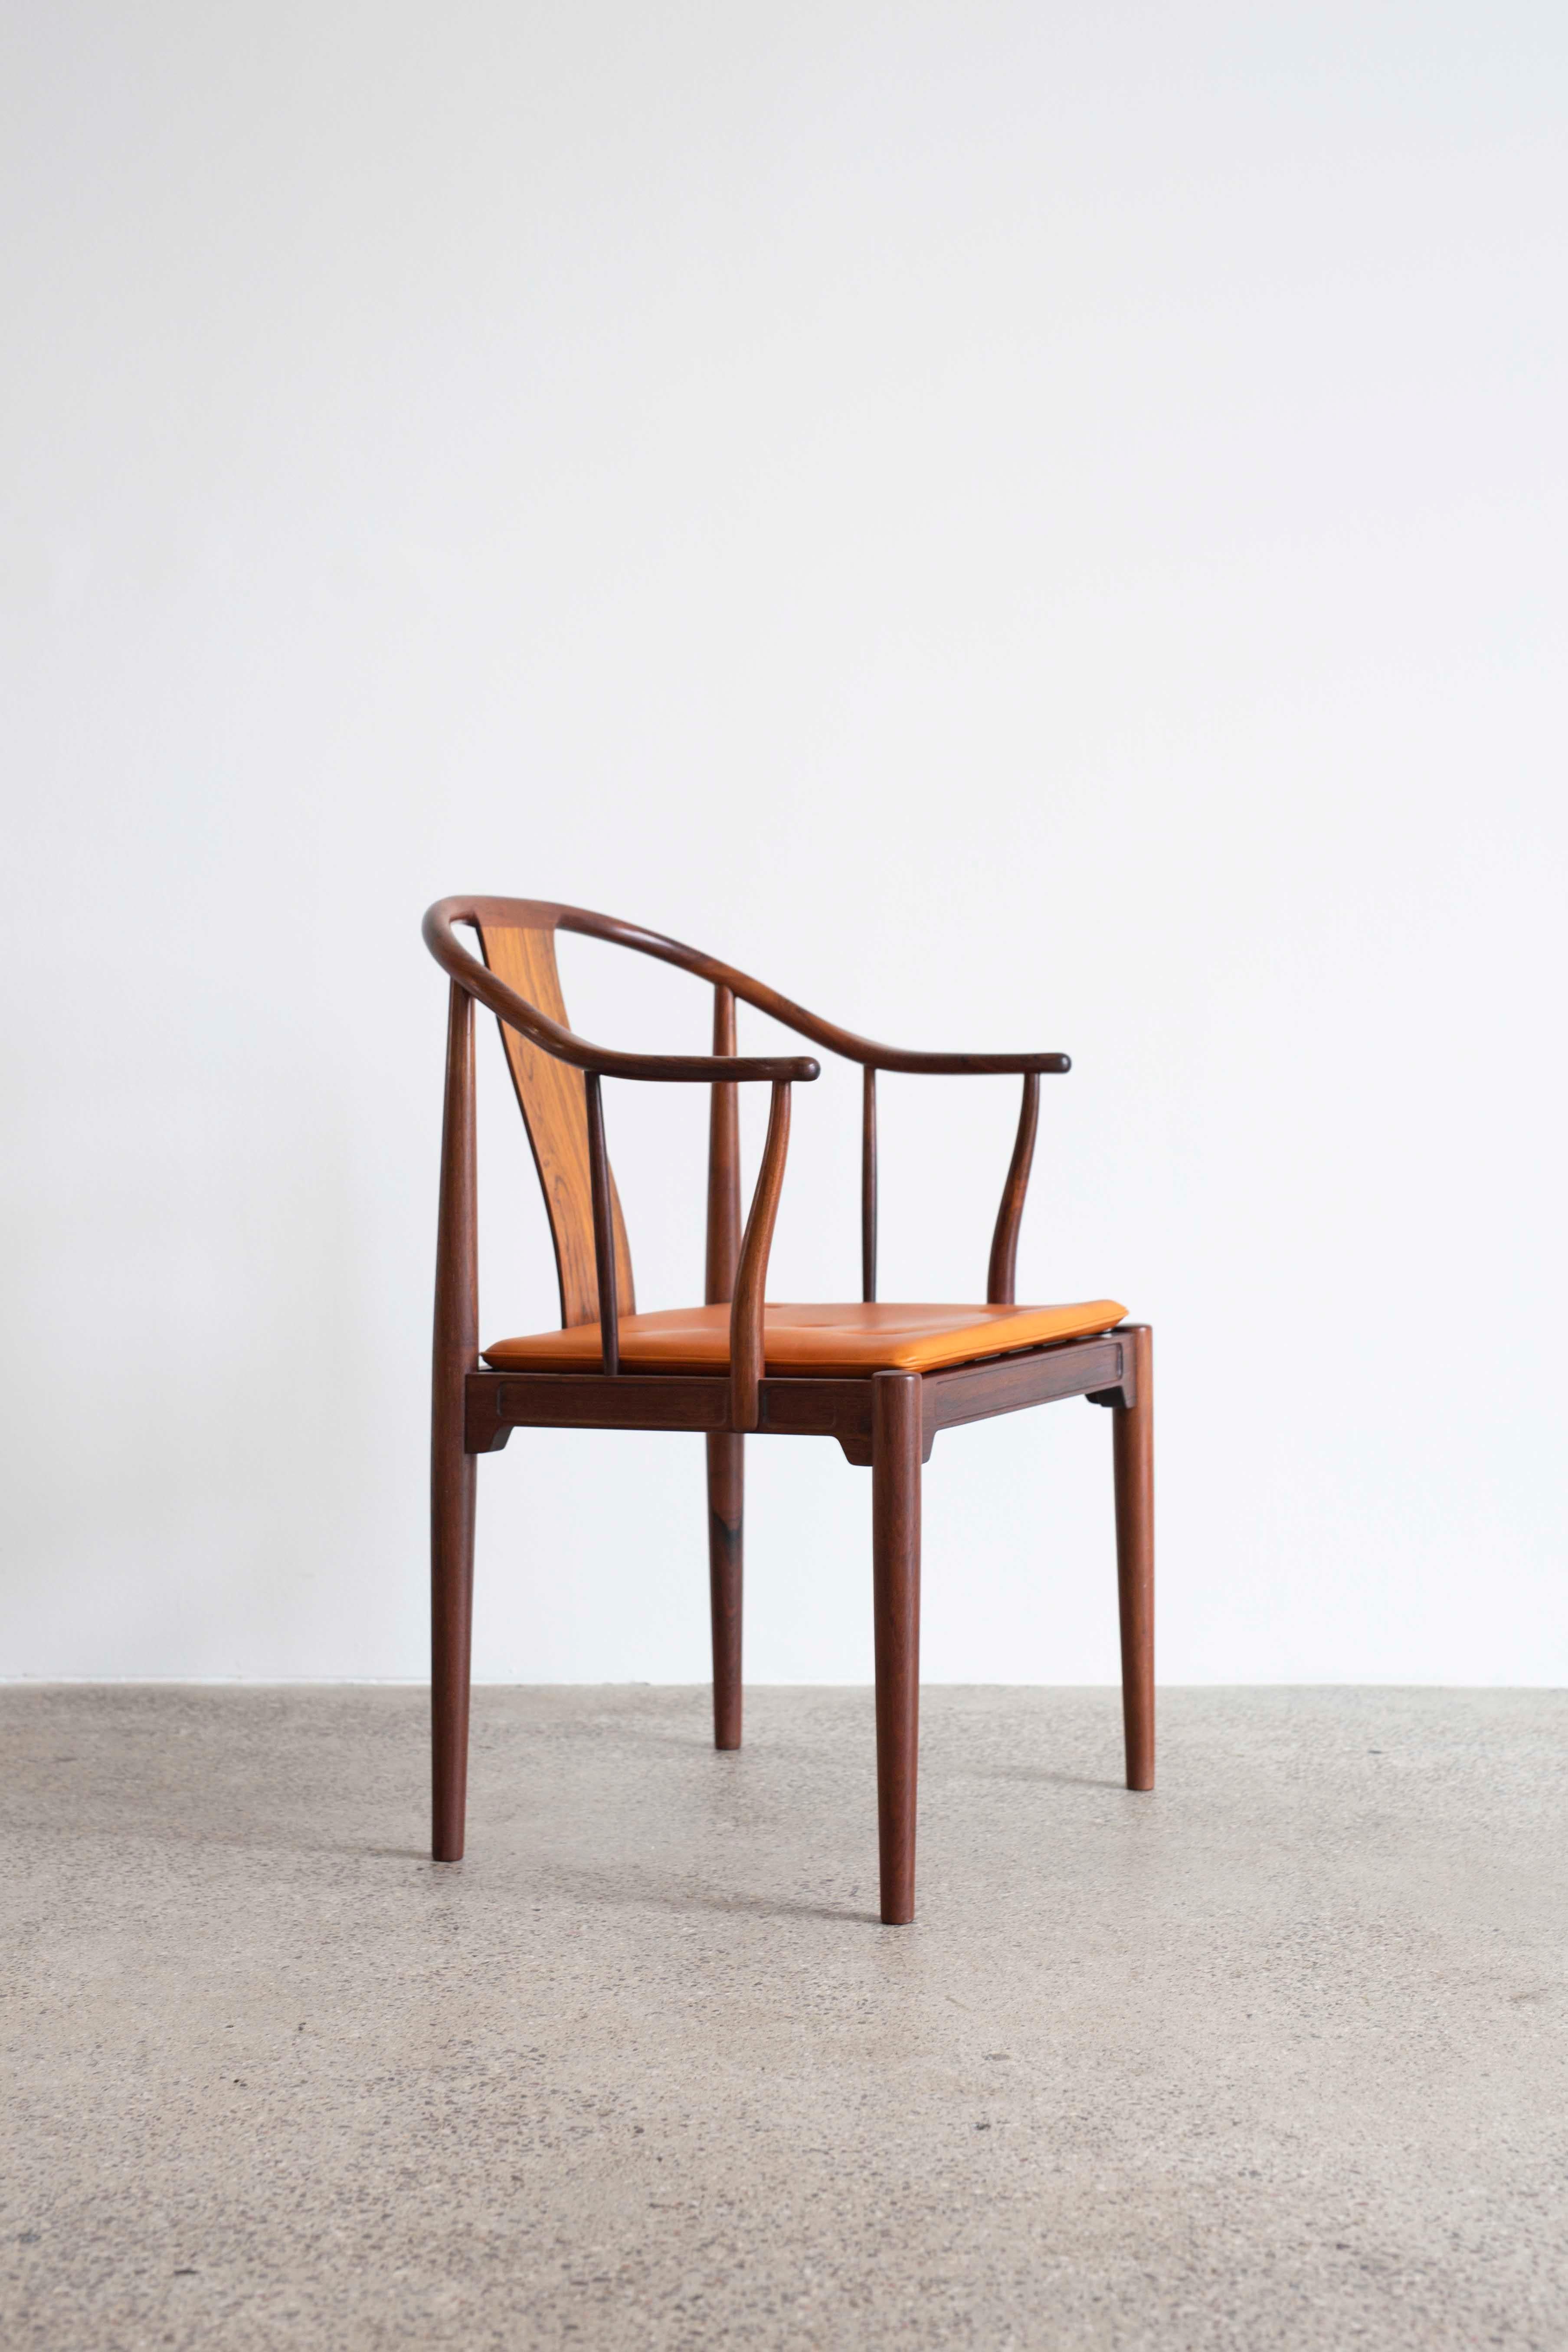 Hans J. Wegner China chair in Brazilian rosewood with leather cushion.
Designed 1944 and executed at Fritz Hansen app, 1960s. 
Very good condition. 

Available as a pair.